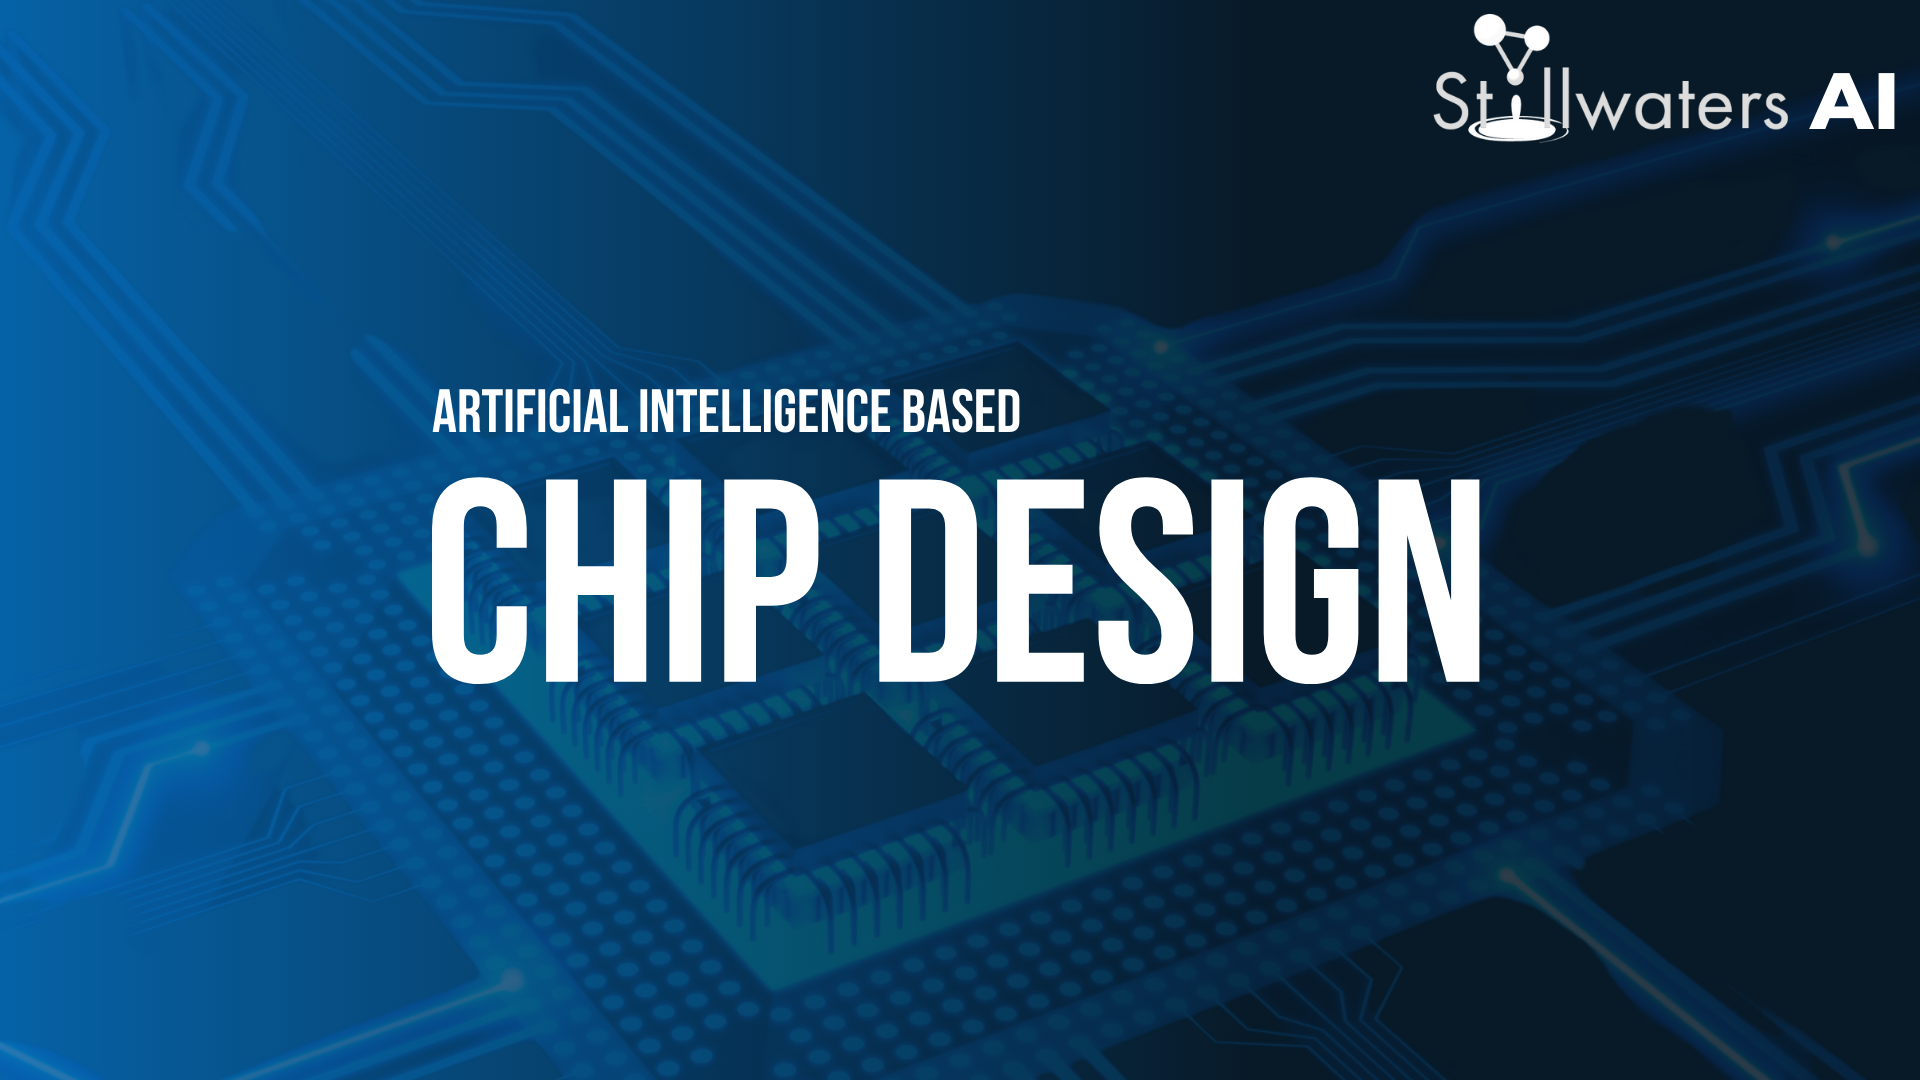 Artificial Intelligence based chip design: Chip Design feature image